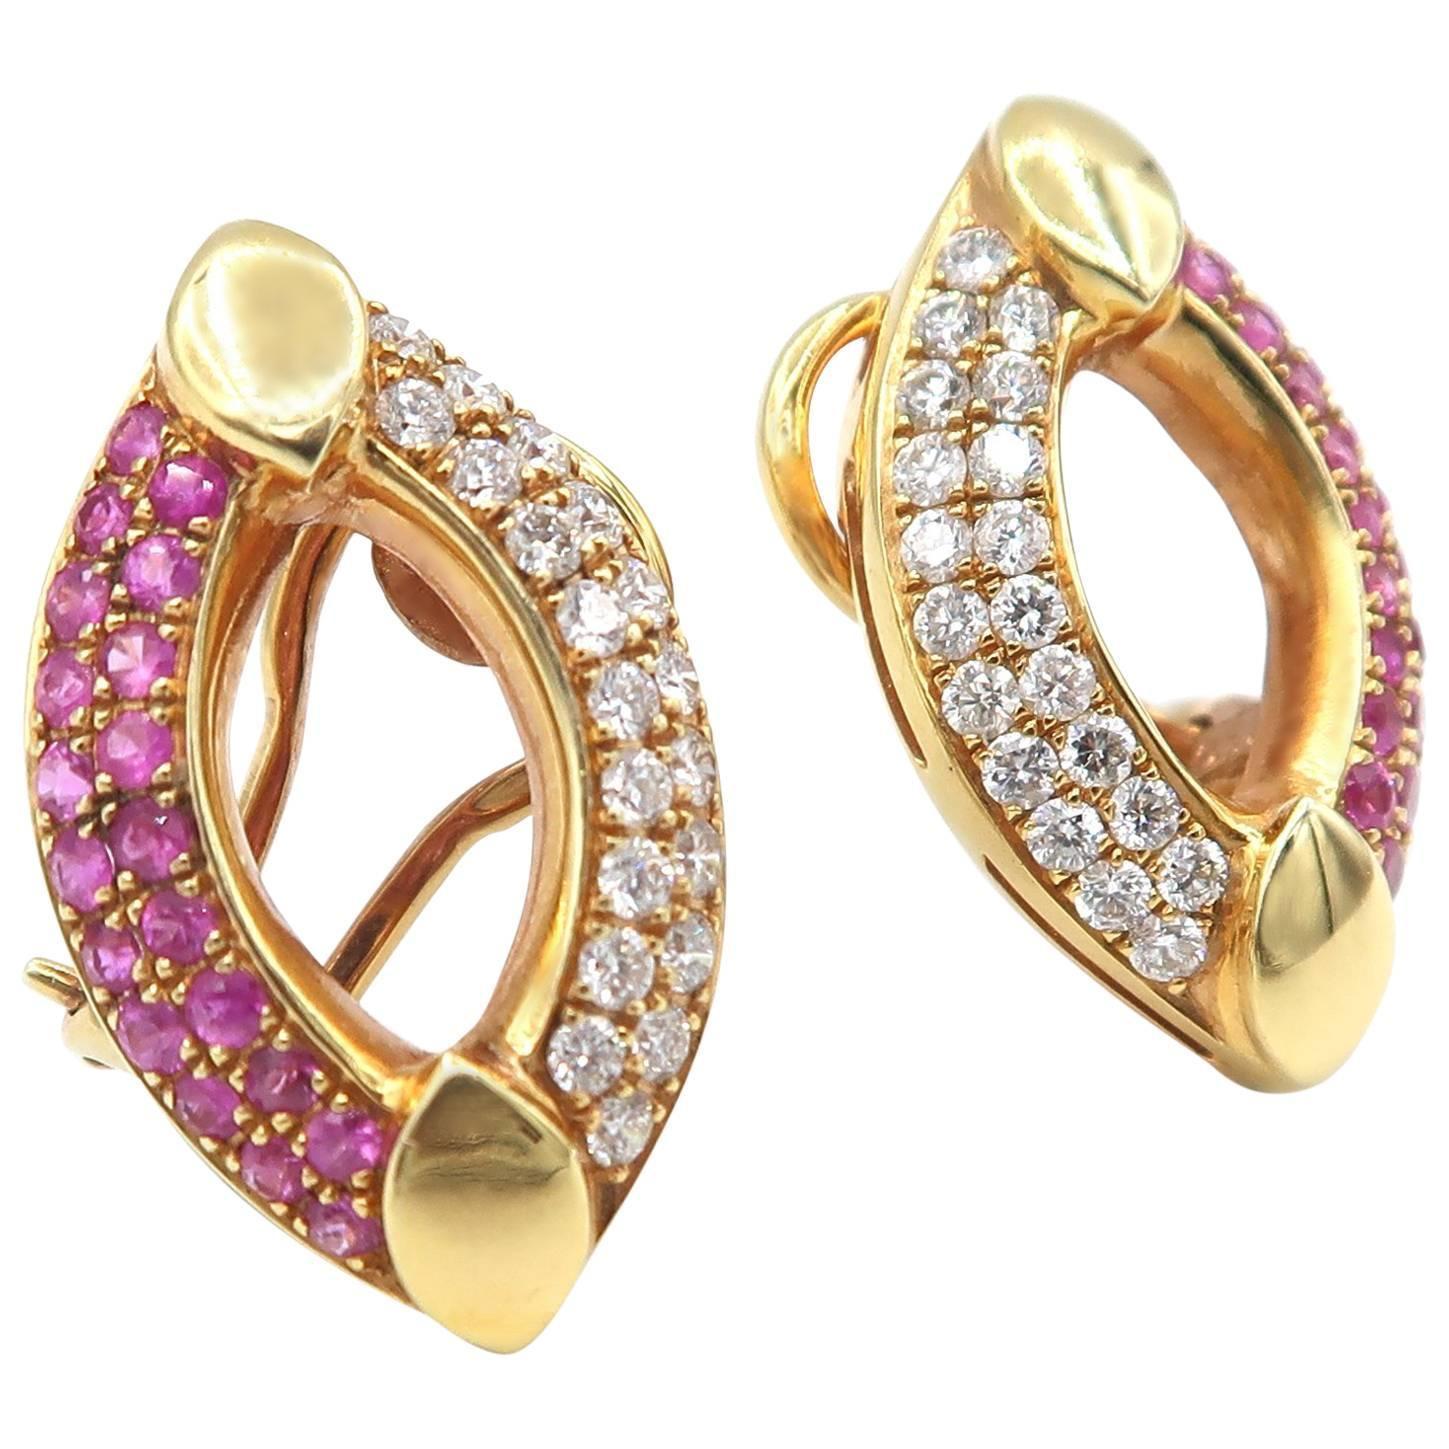 Geometric Shape of Pointed Ellipse Clip-On Earrings in 18K Rose Gold Pavé Set with Pink Sapphires & Diamonds.

Suitable for non pierced ears. 

Pink Sapphire: 1.65 ct
Diamond: 1.04 ct
Gold: 18K Rose Gold, 11.76 g